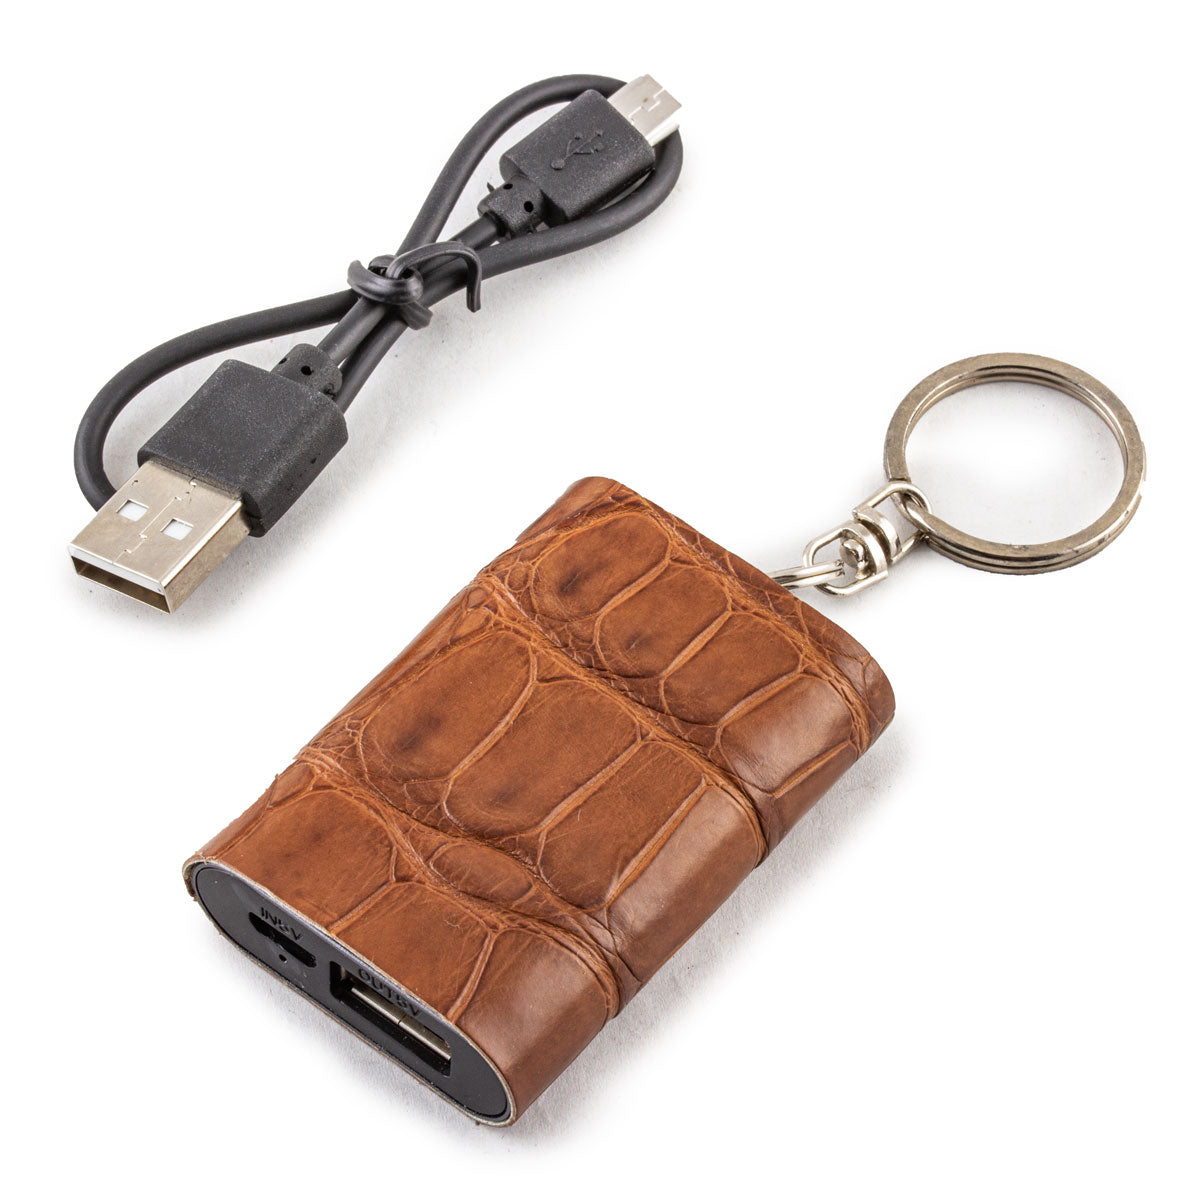 Powerbank keychain - Alligator - Universal charger iPhone, Samsung – ABP  Concept